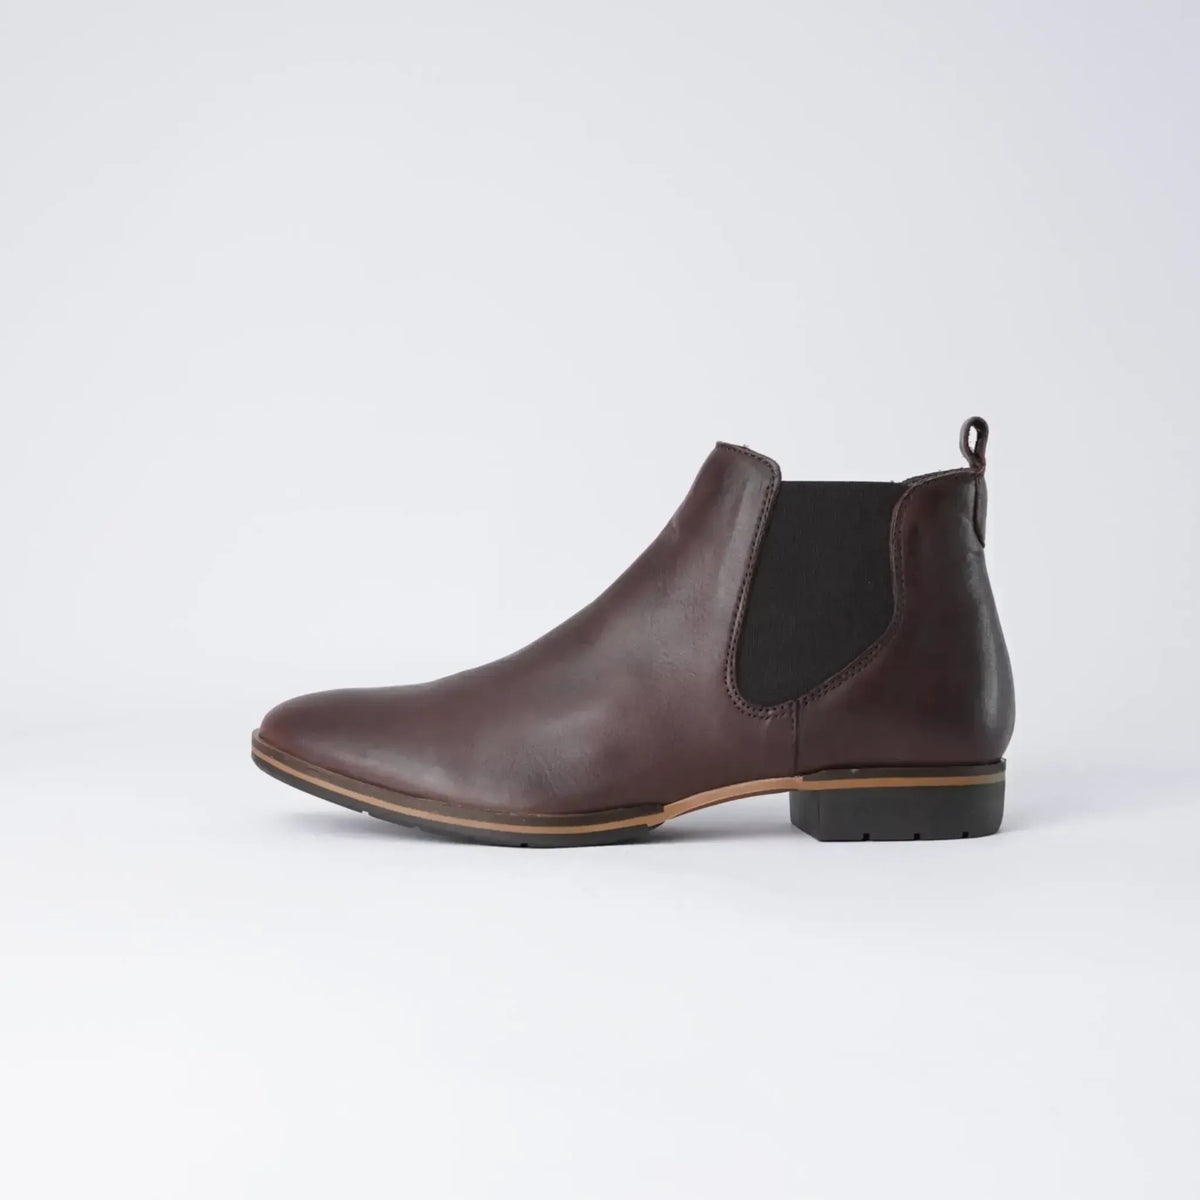 Gala Chestnut Leather Ankle Boots